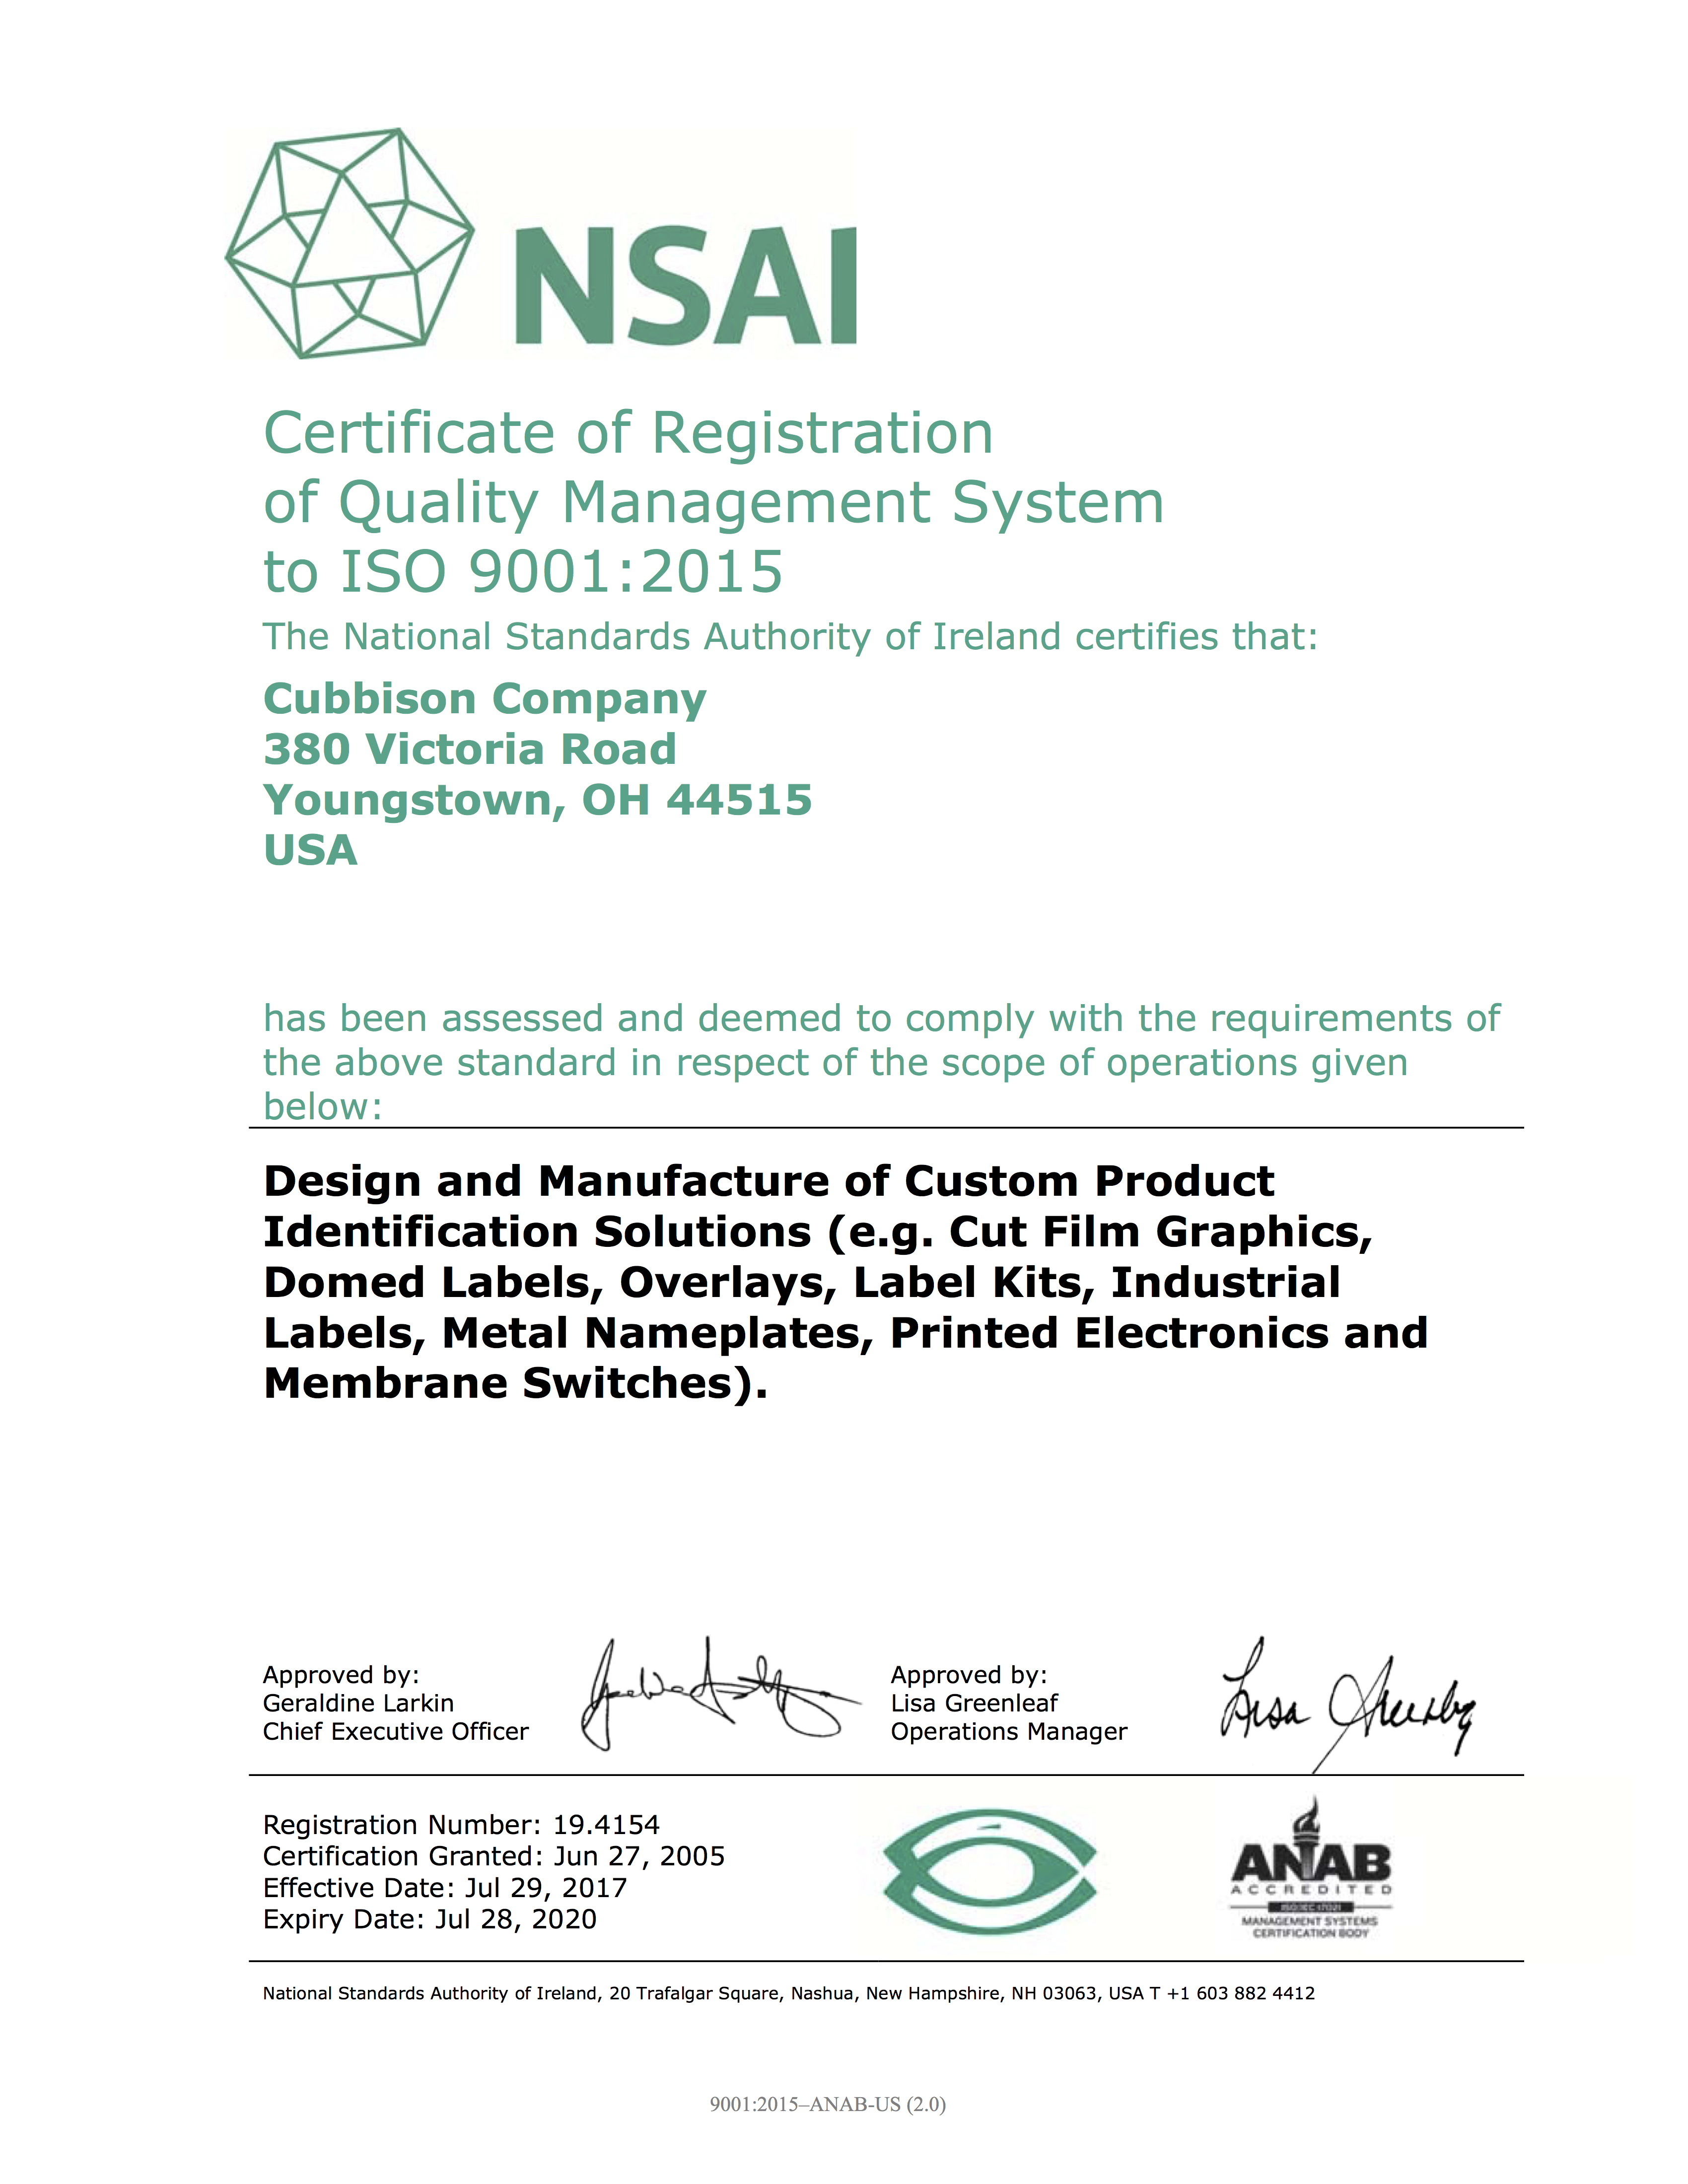 ISO 9001:2015 - We Have It!